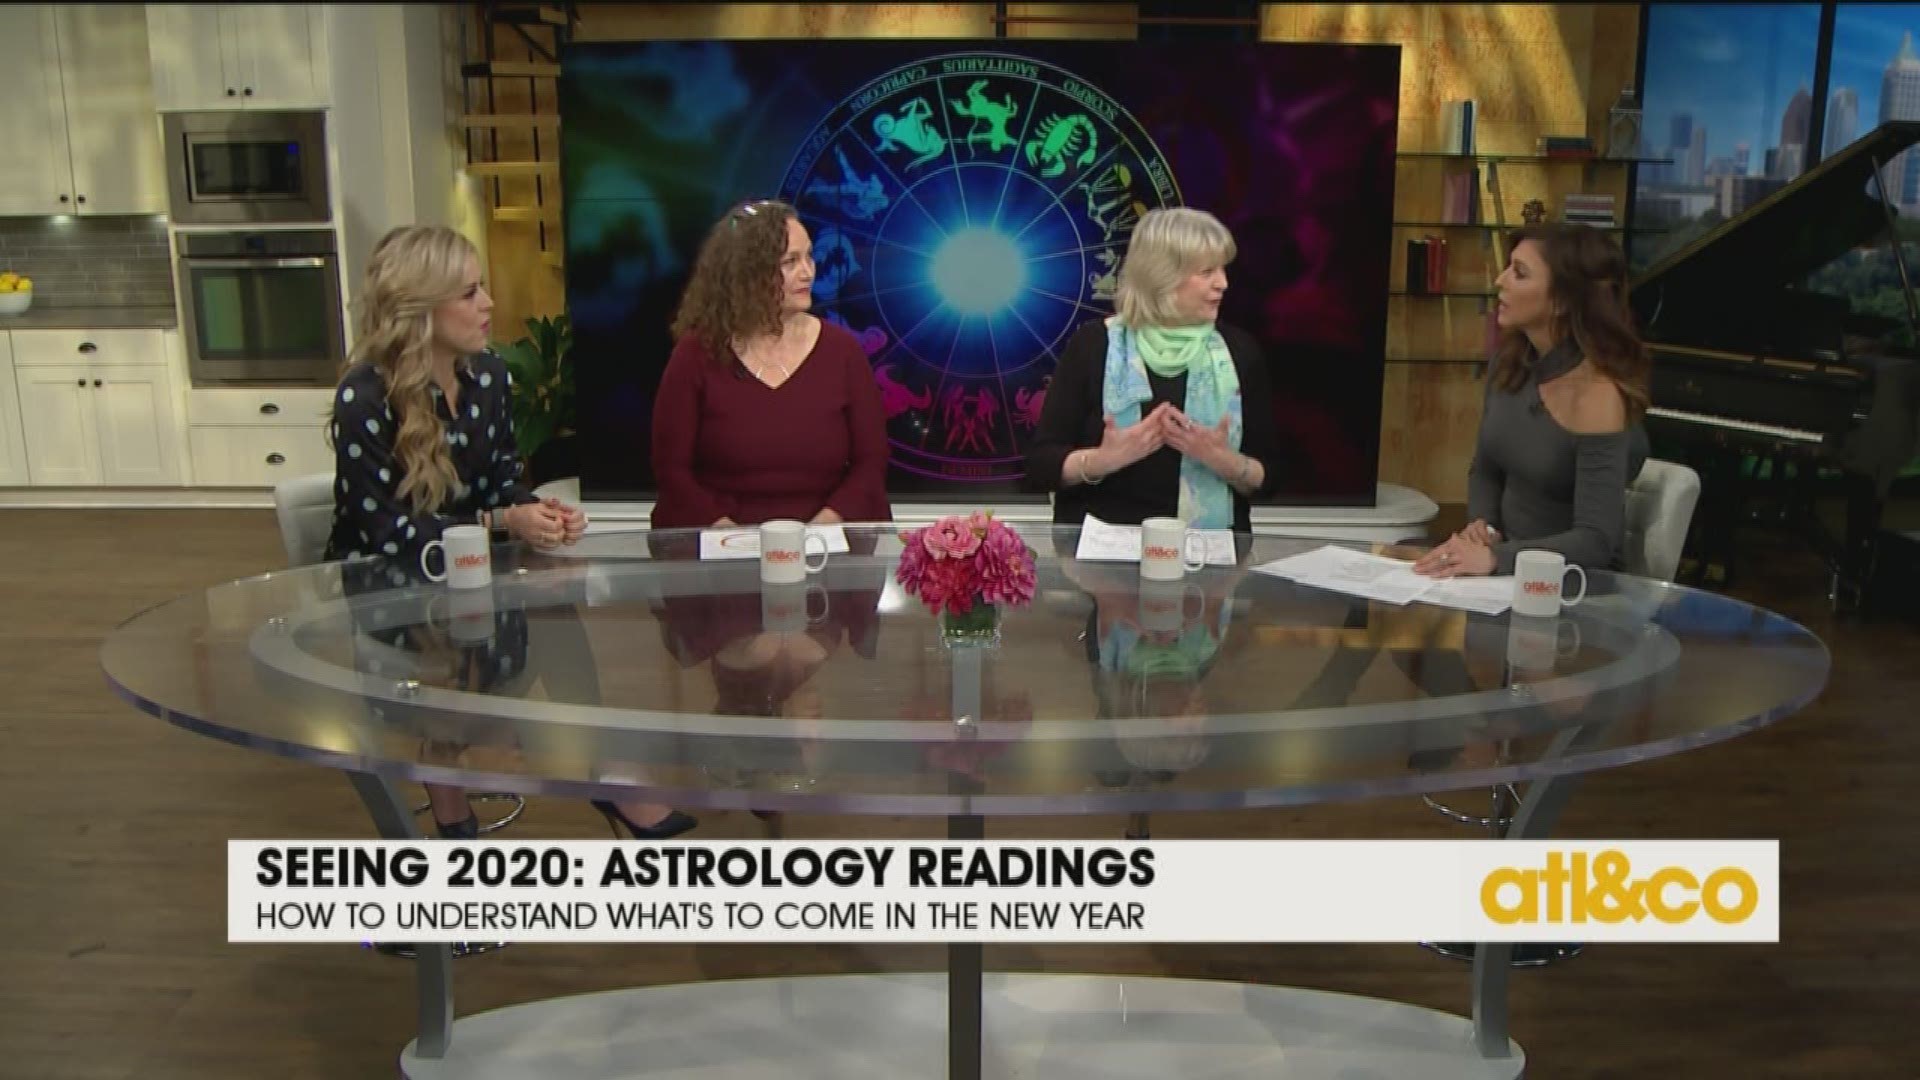 The Metropolitan Atlanta Astrological Society shares Christine and Cara's birth charts for the New Year.